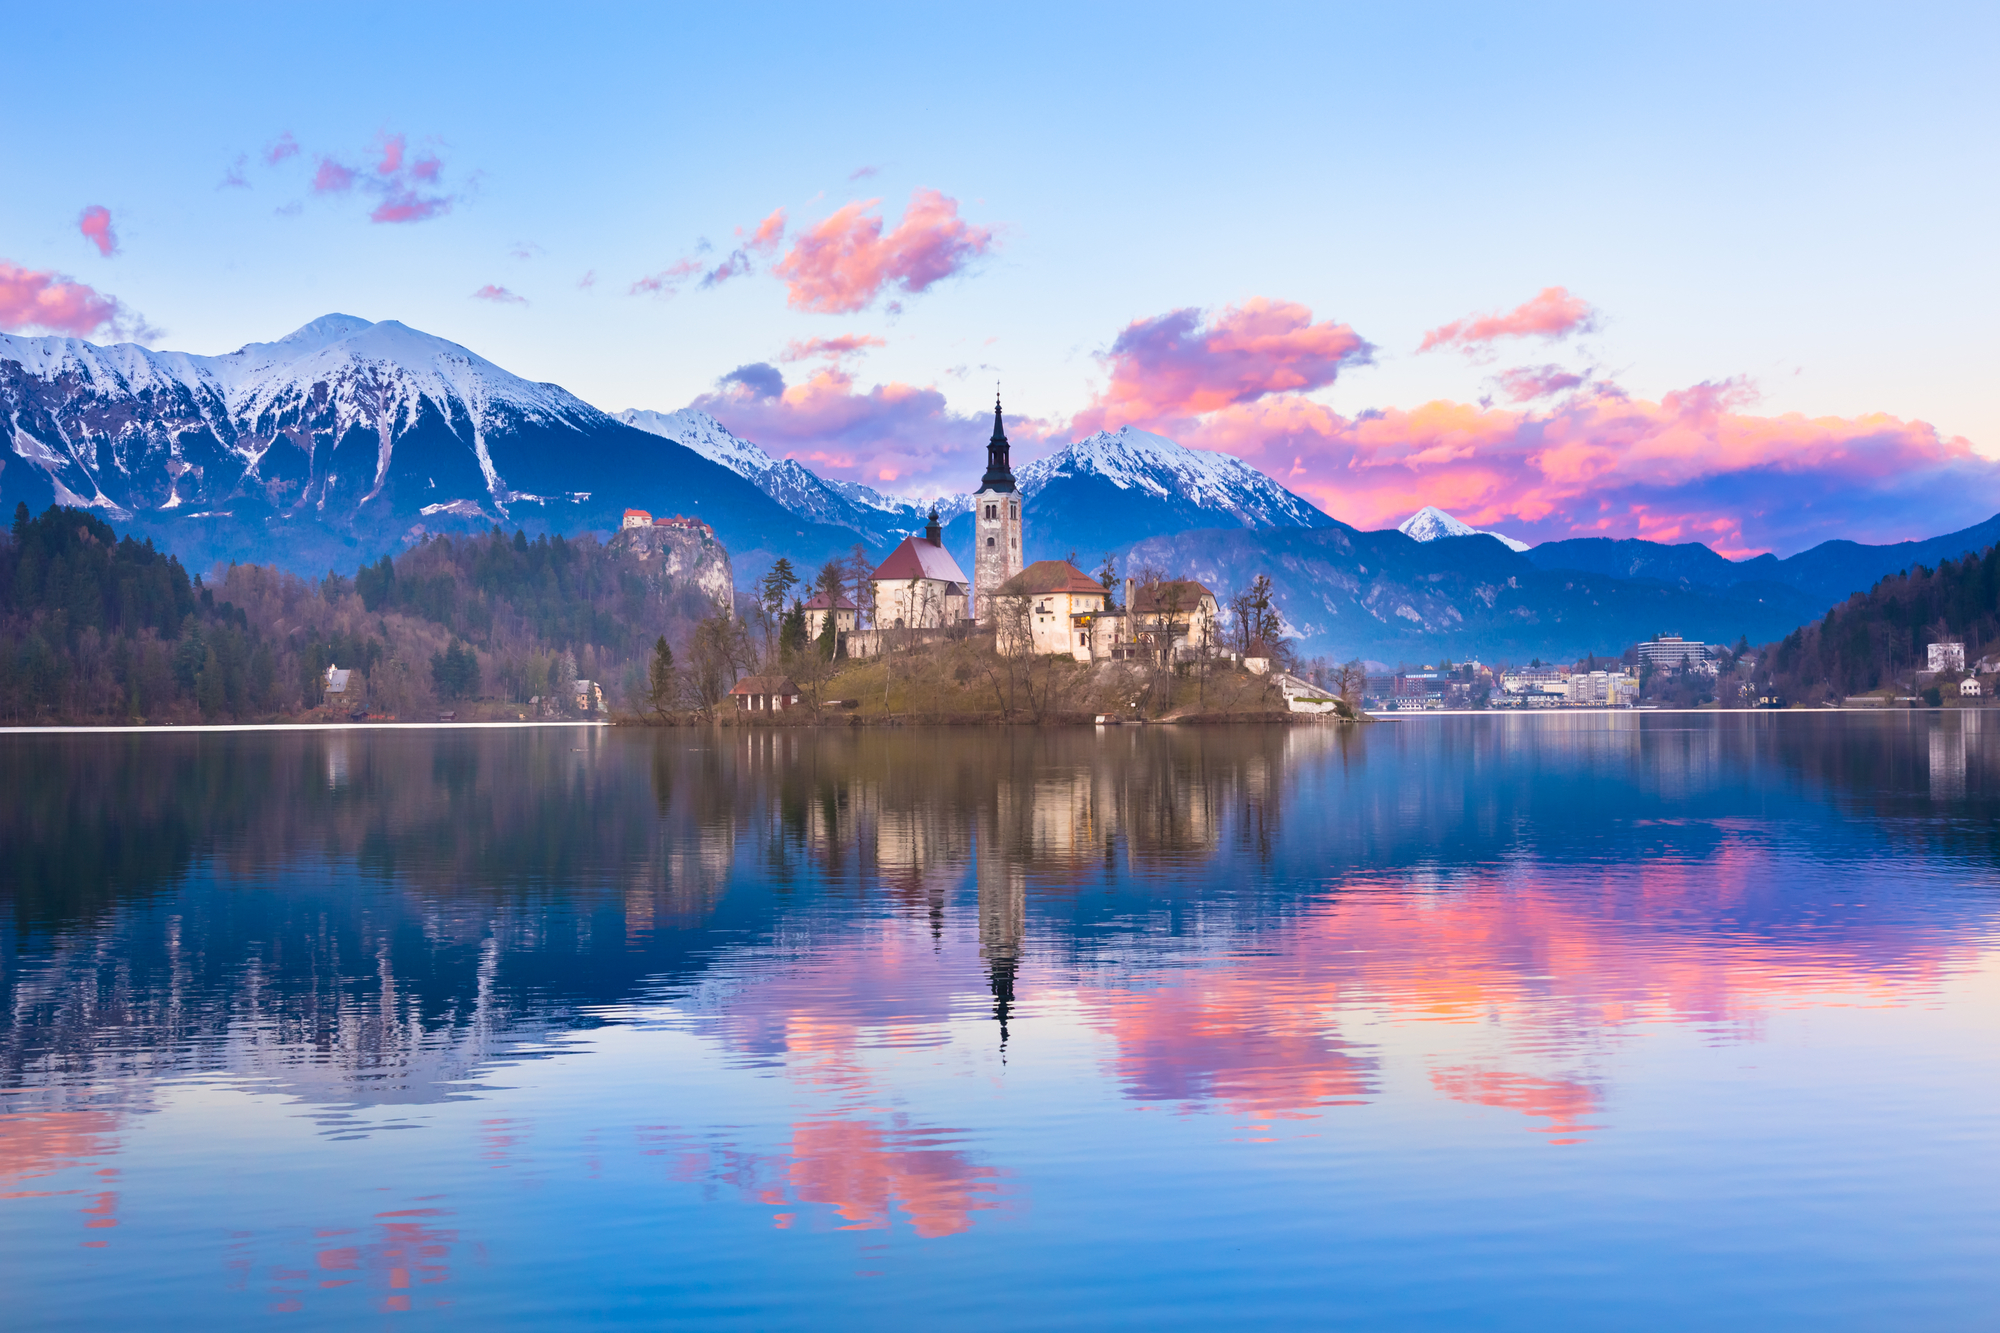 Sunset view of Julian Alps, Lake Bled with St. Marys Church of the Assumption on the small island. Bled, Slovenia, Europe.